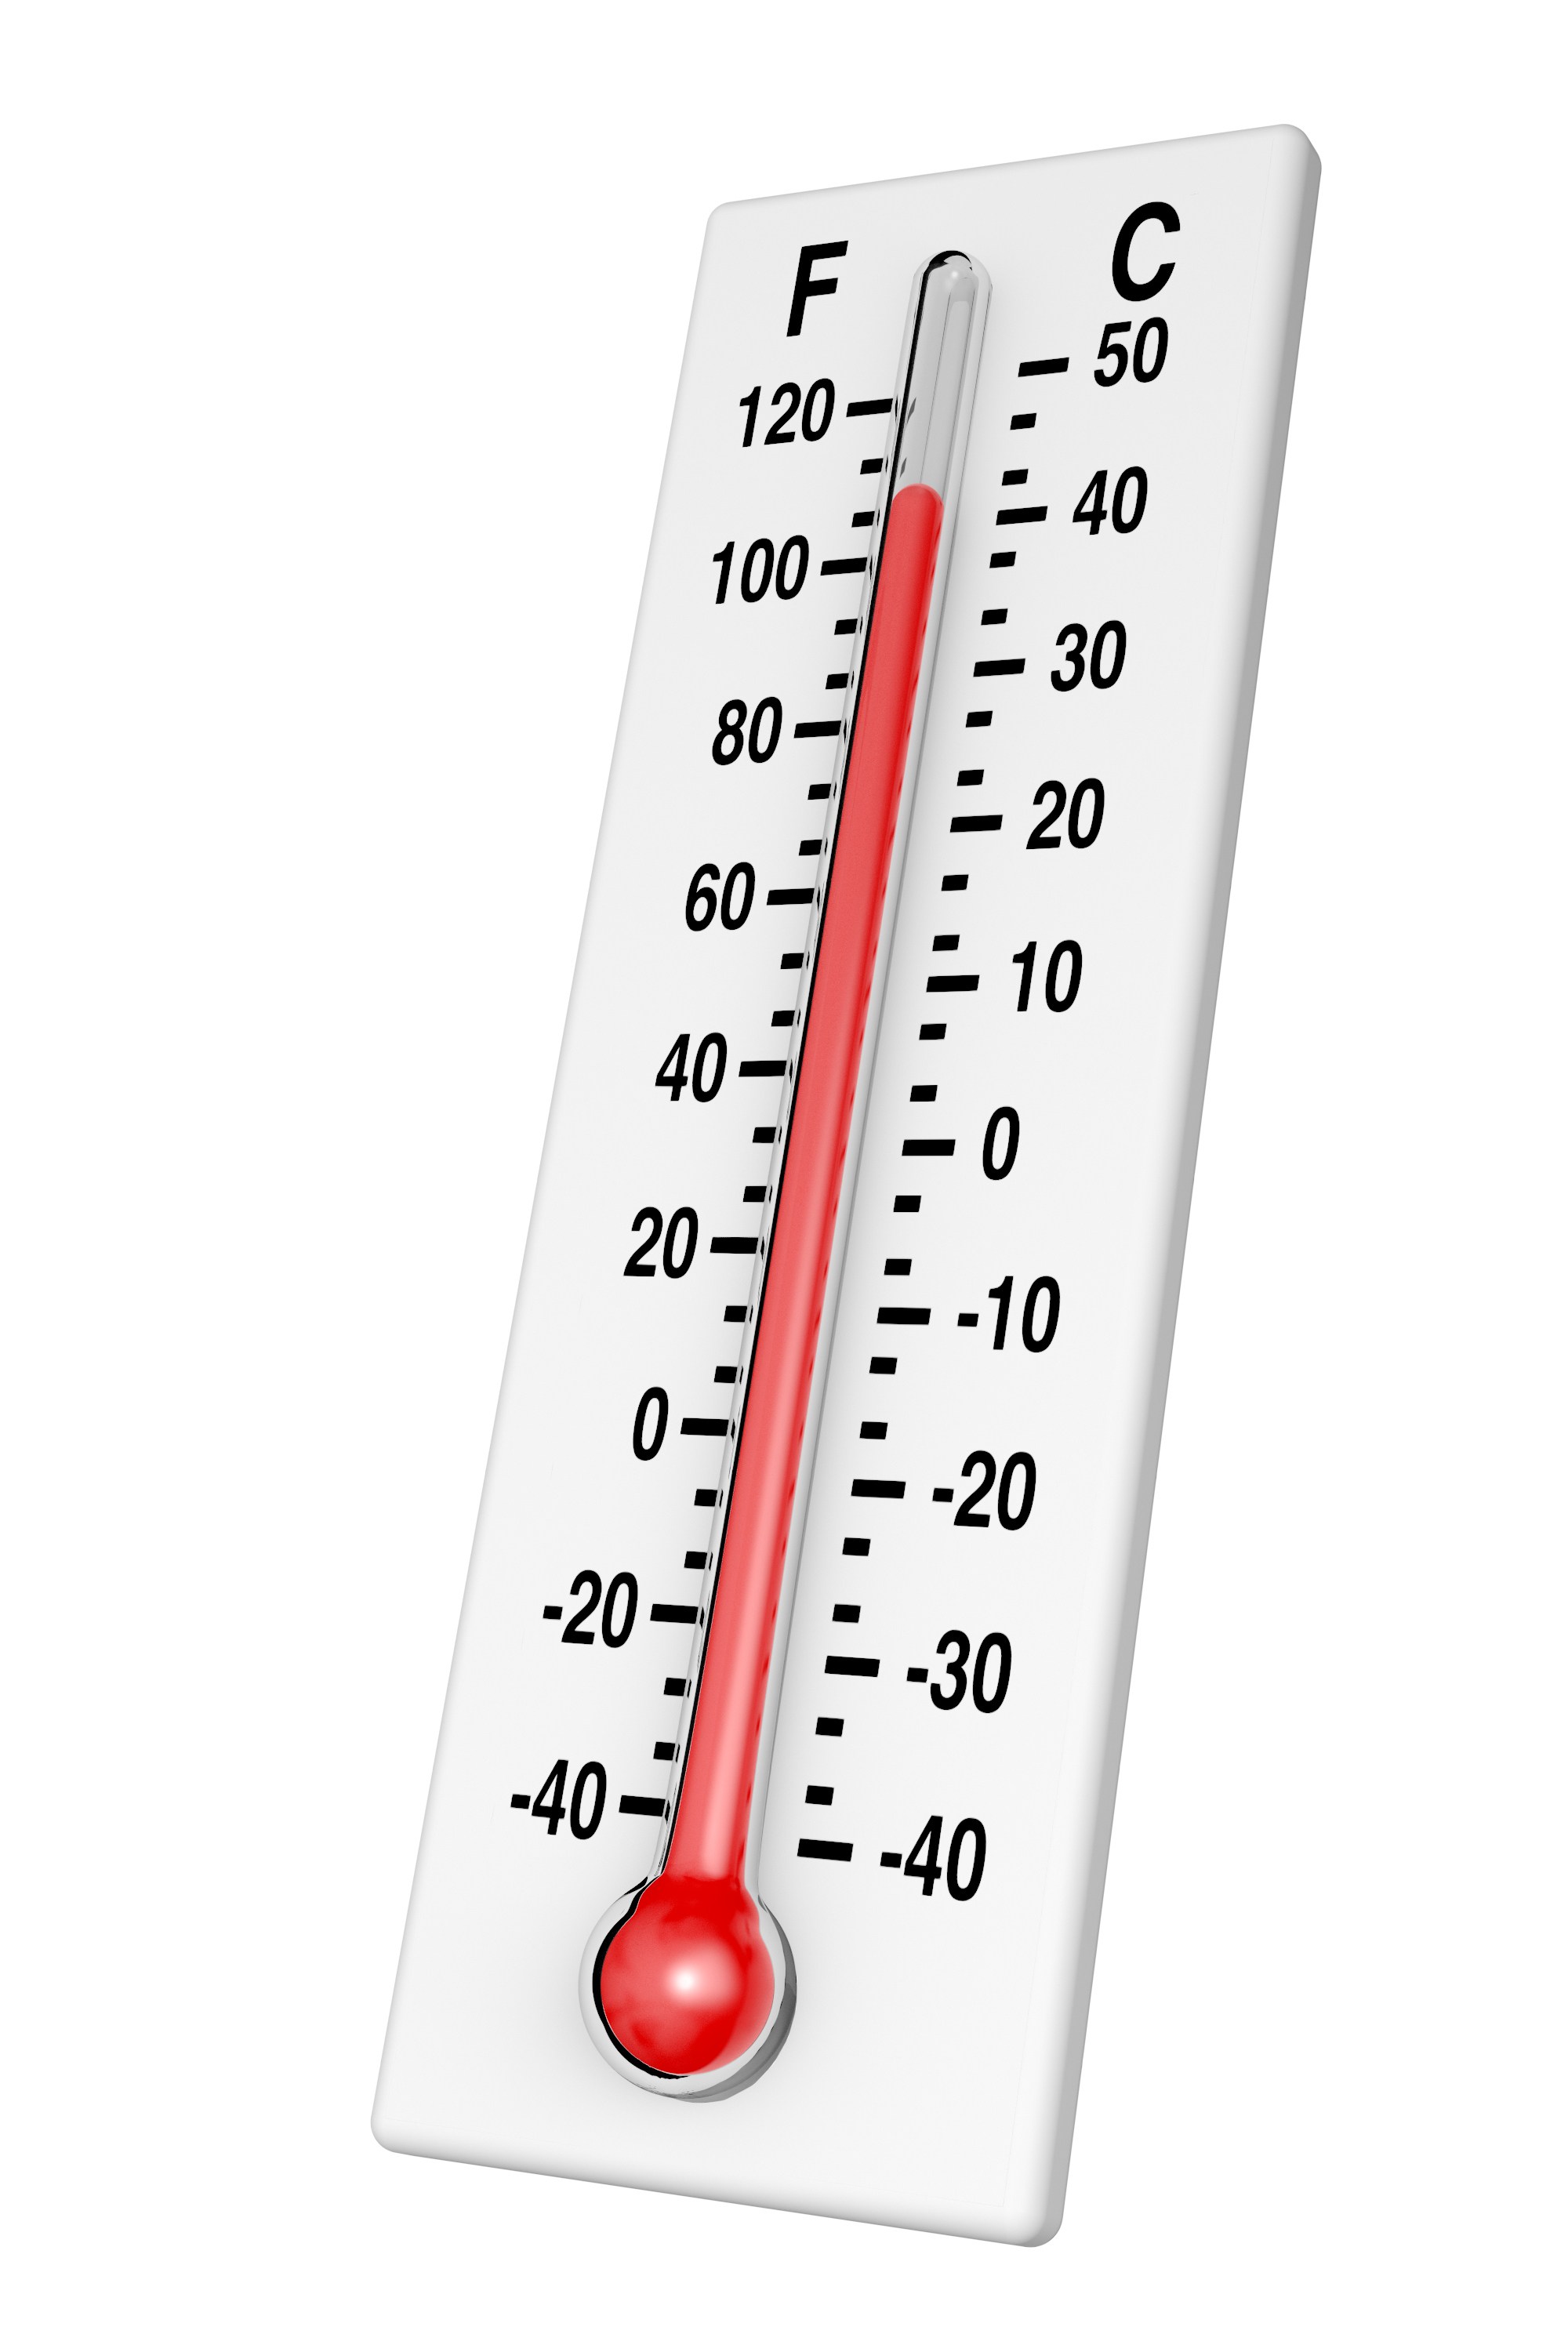 105 degree thermometer clipart clipart images gallery for.